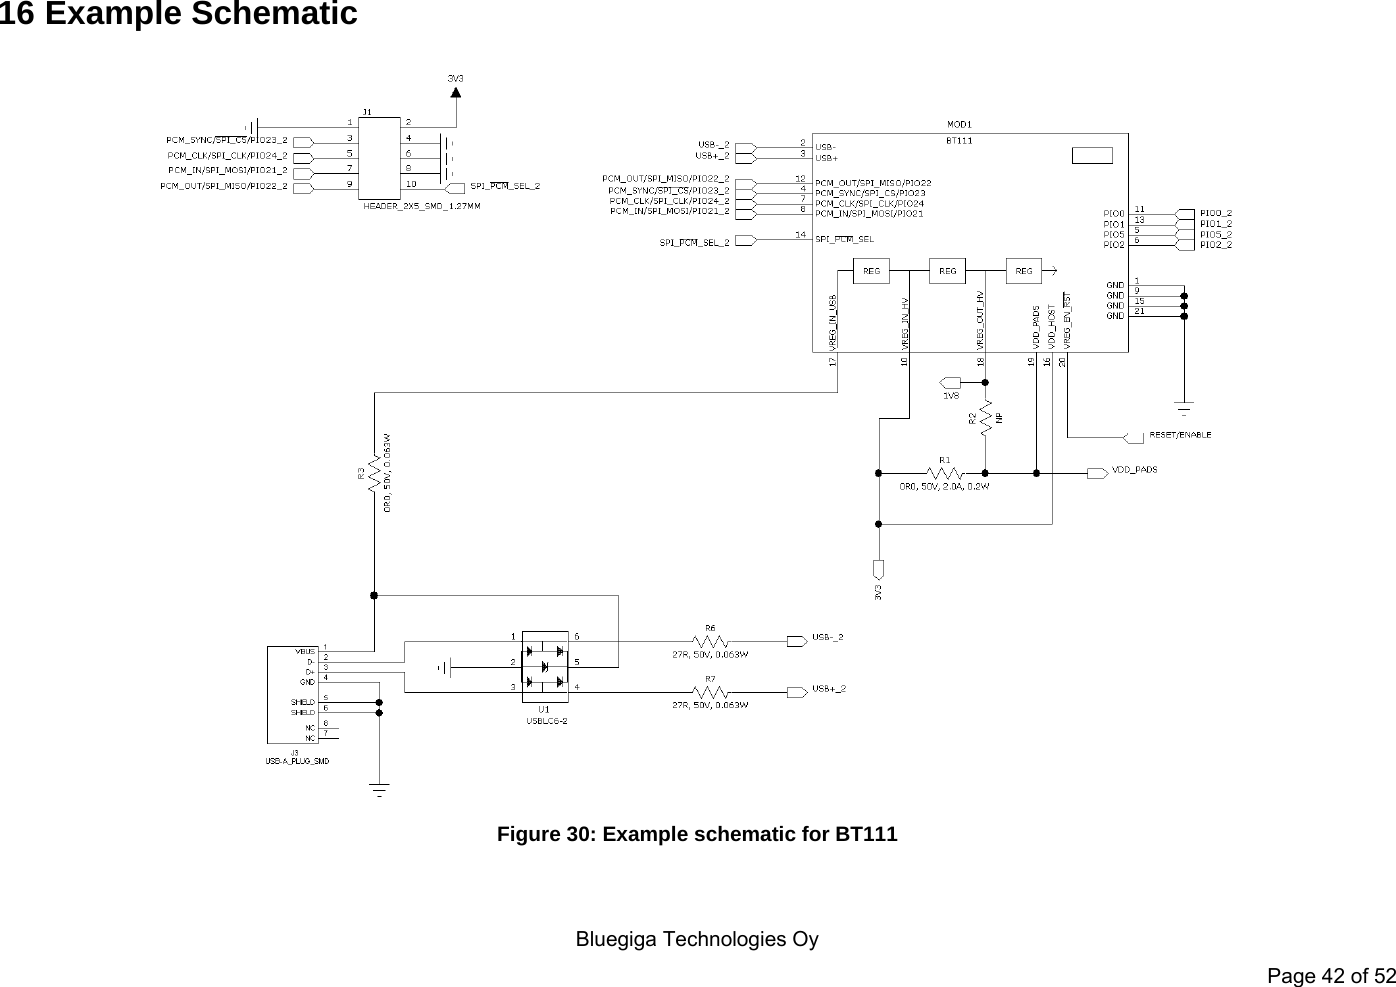    Bluegiga Technologies Oy Page 42 of 52 16 Example Schematic  Figure 30: Example schematic for BT111